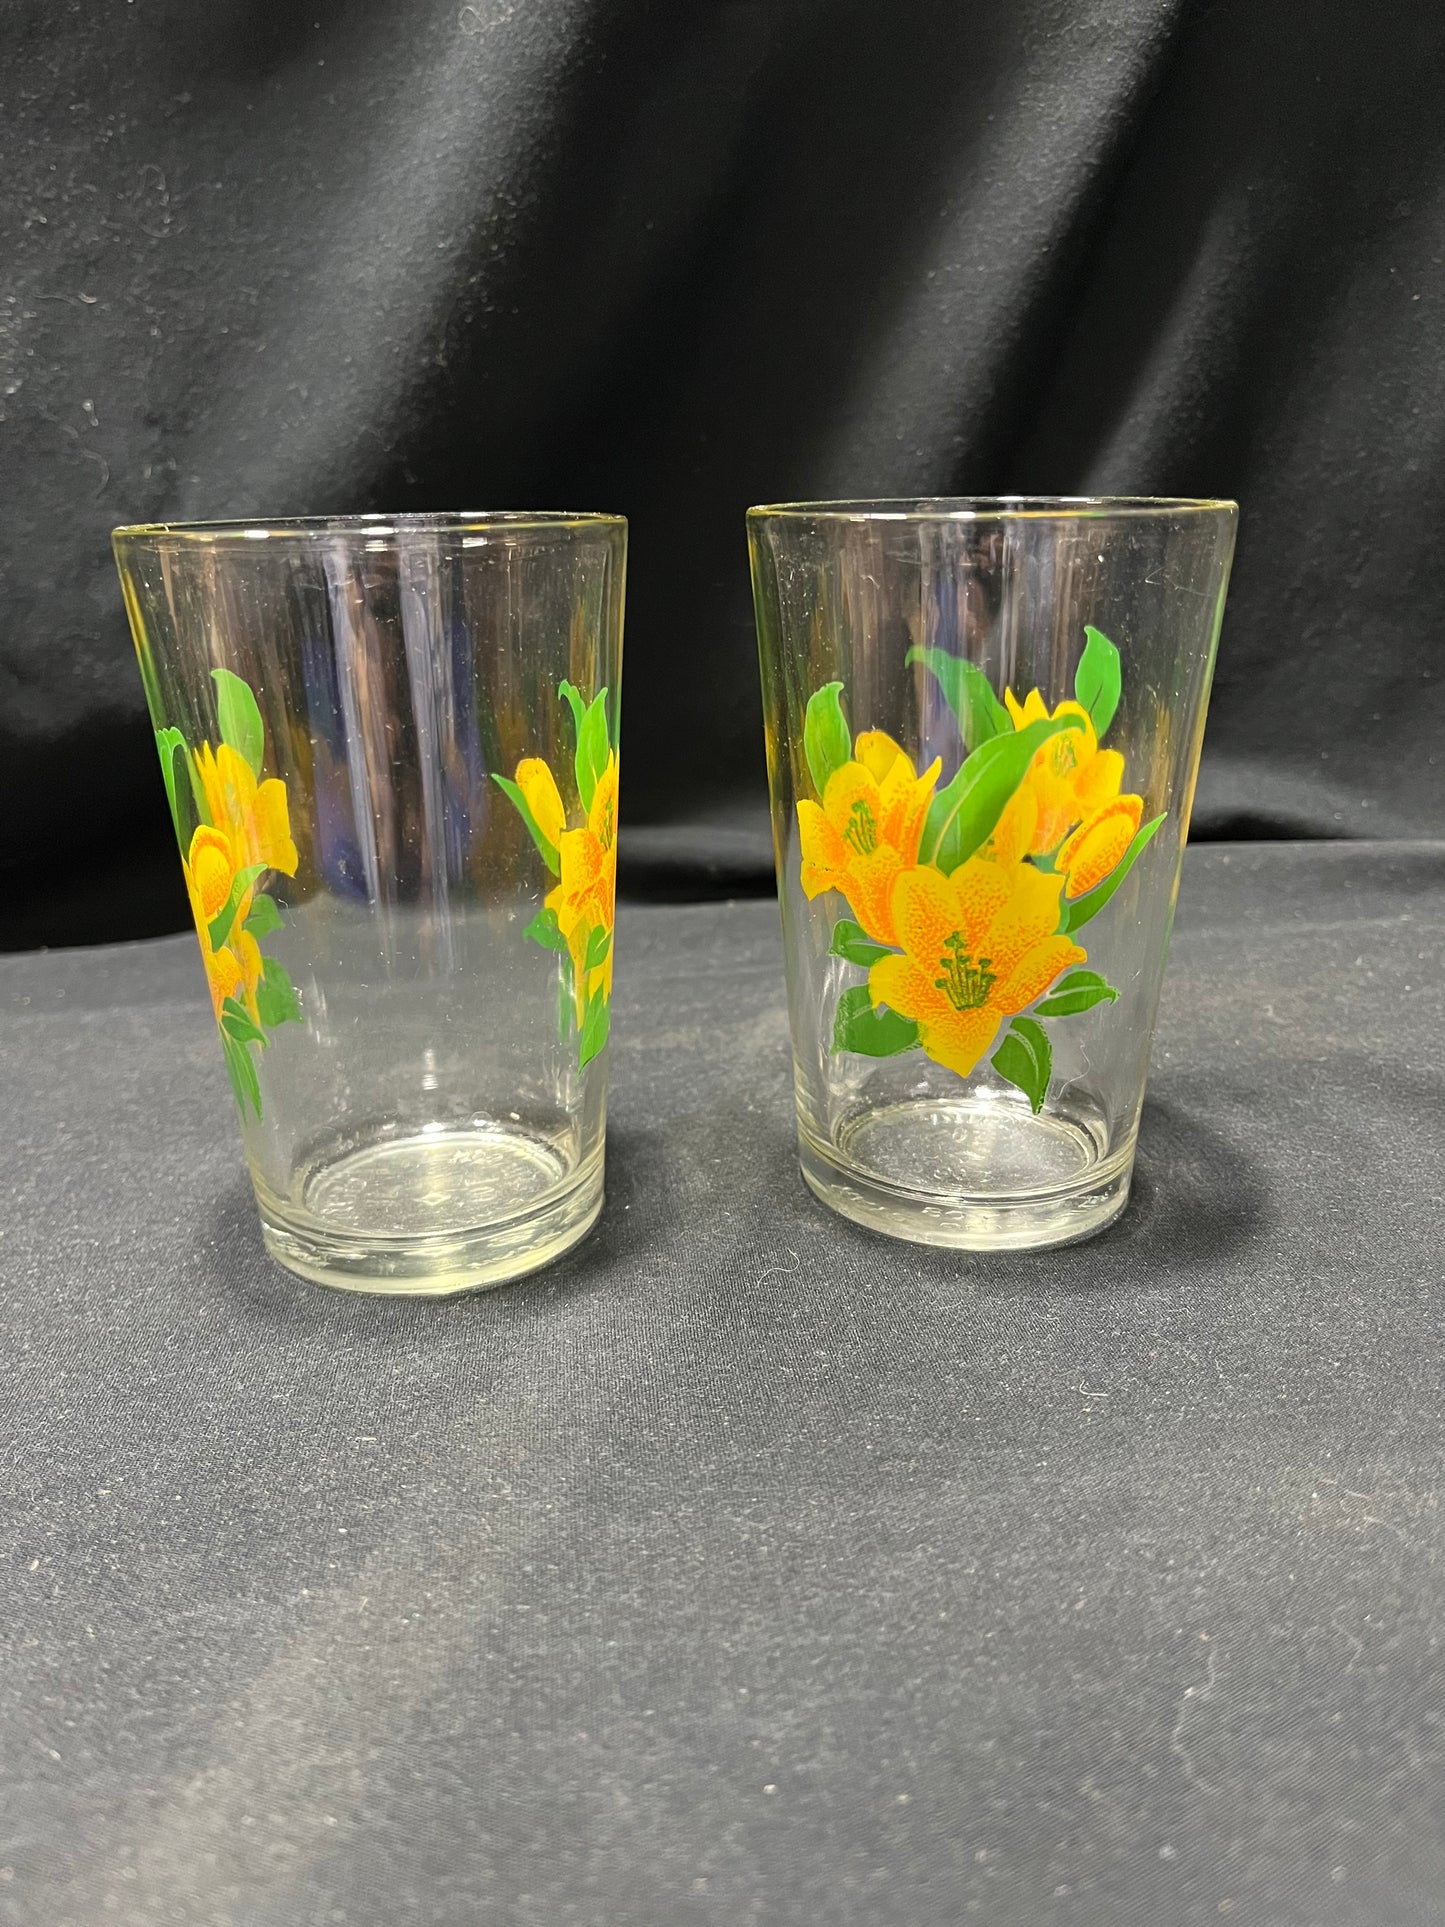 Morning Star Juice Glasses Pair with Yellow Flowers